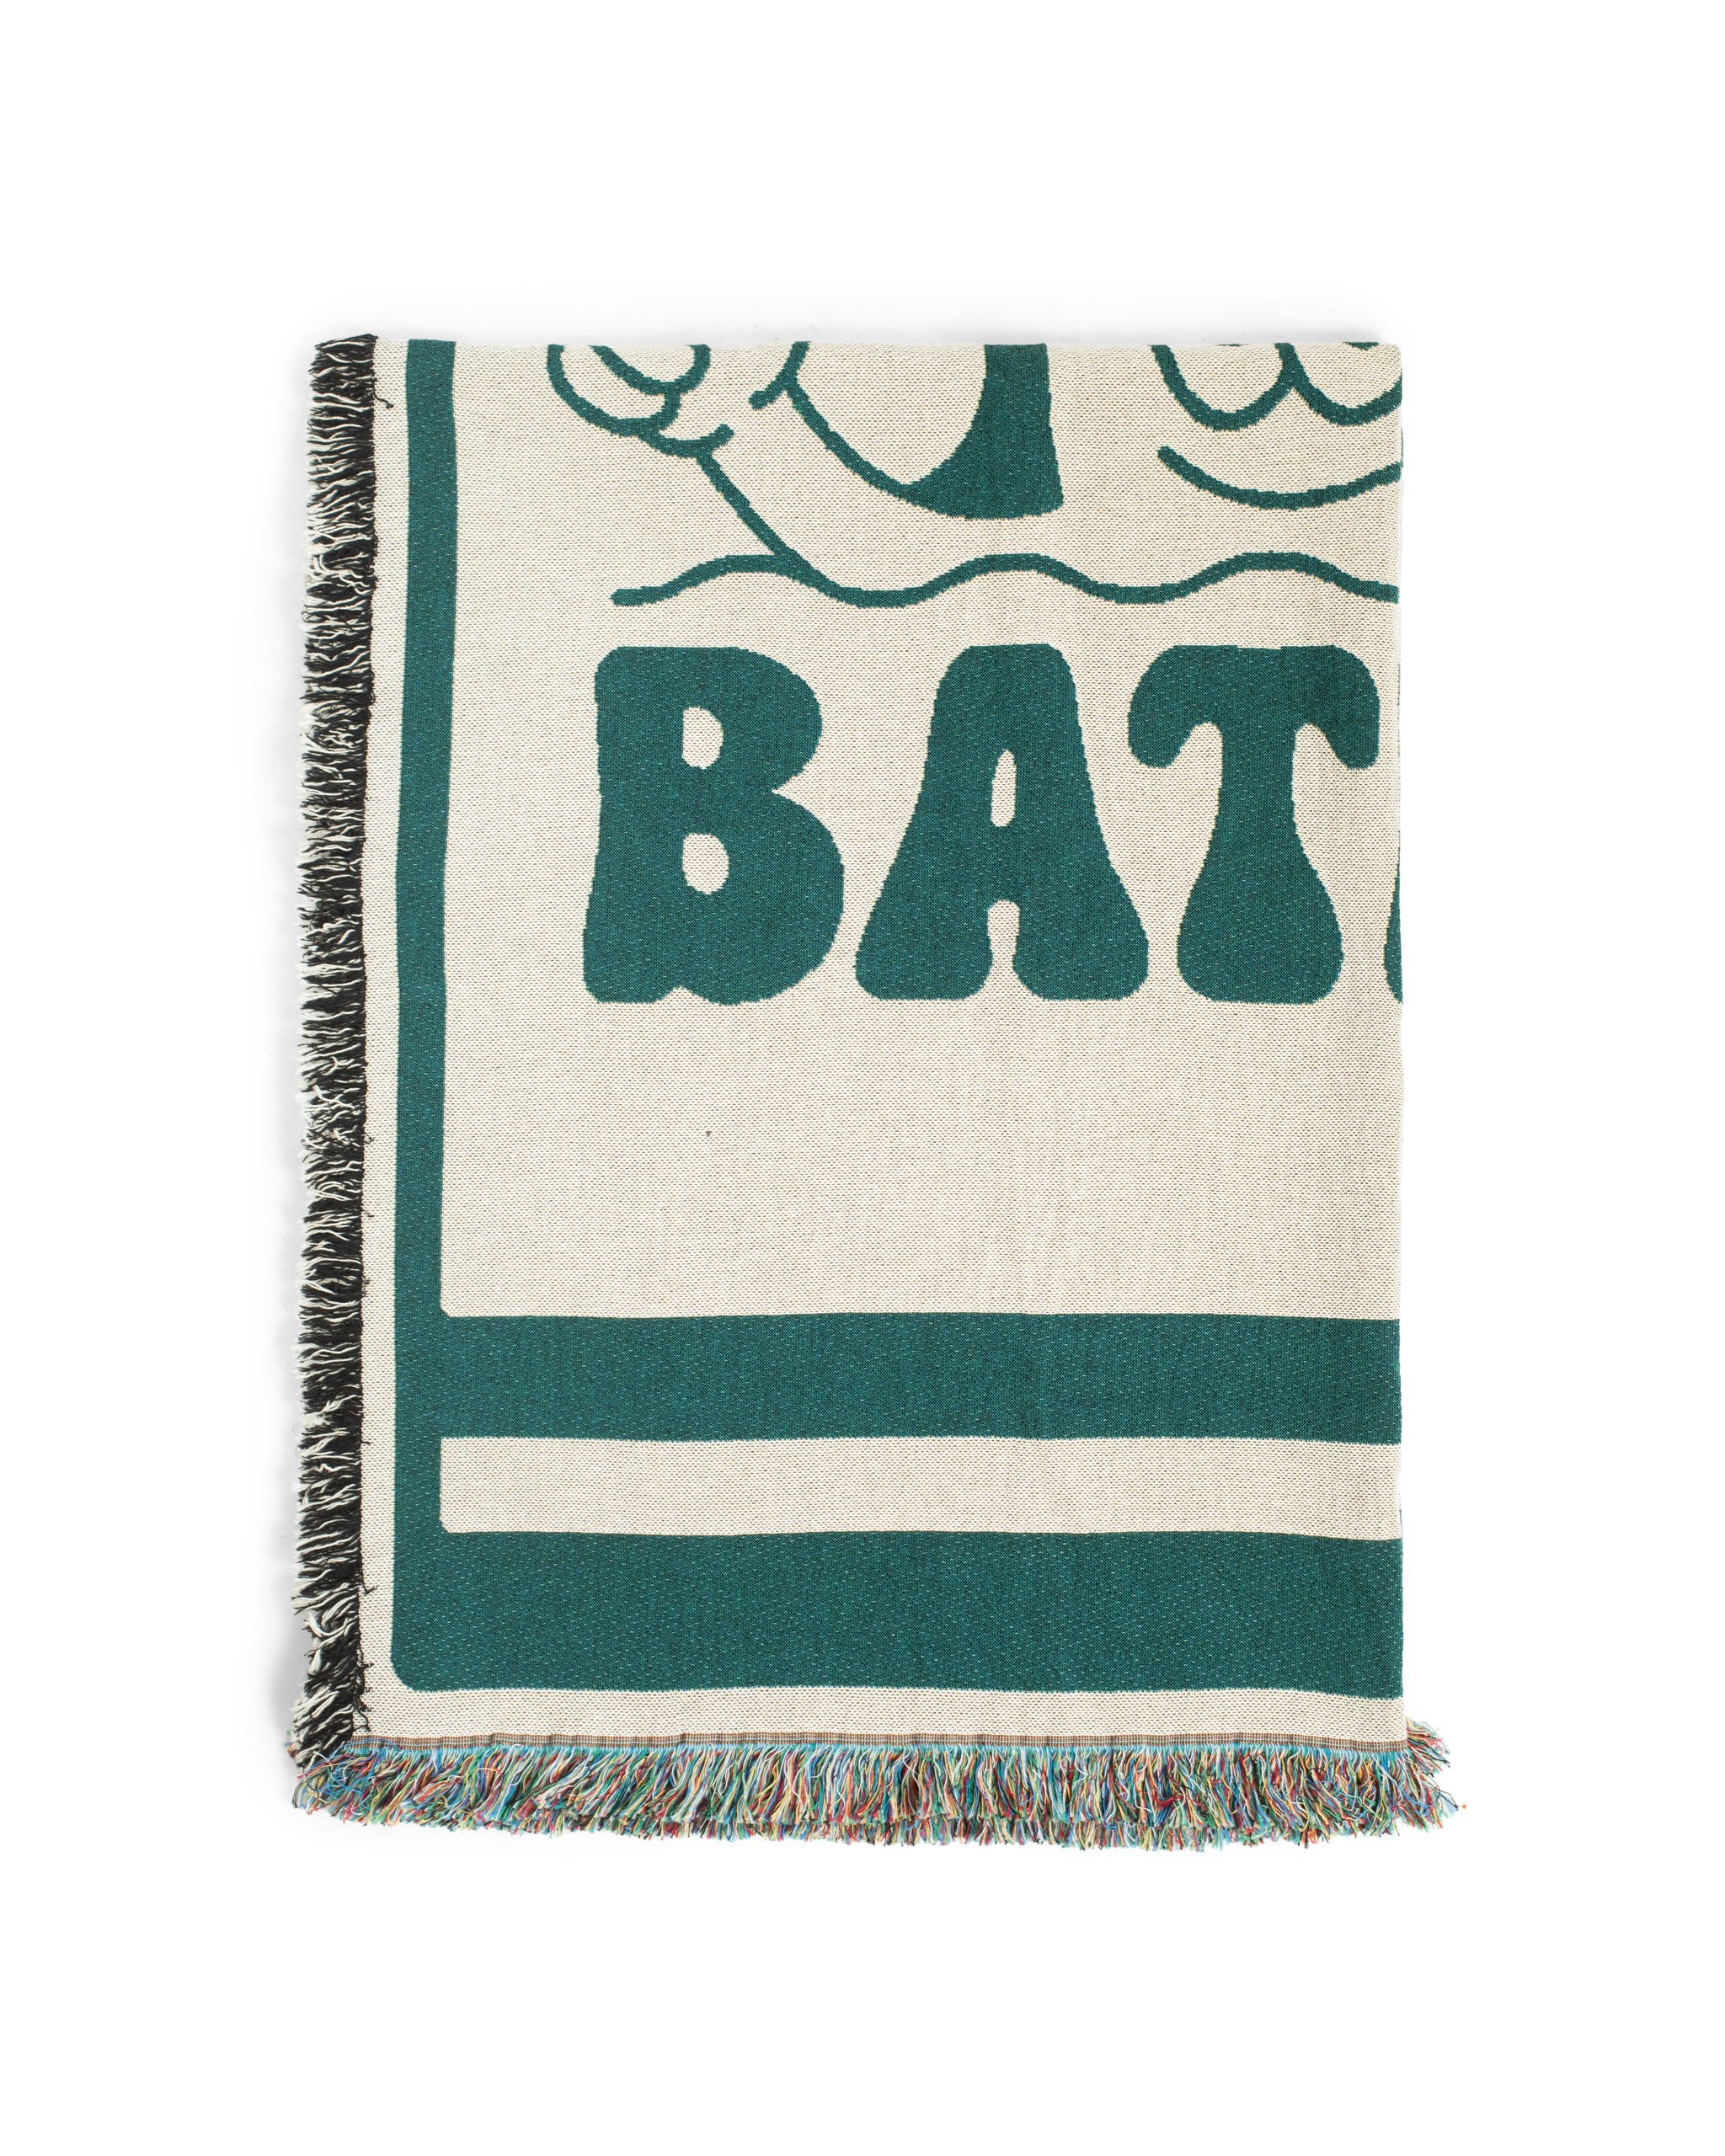 Folded Green and Natural Sunshine Graphic Cotton Throw Blanket